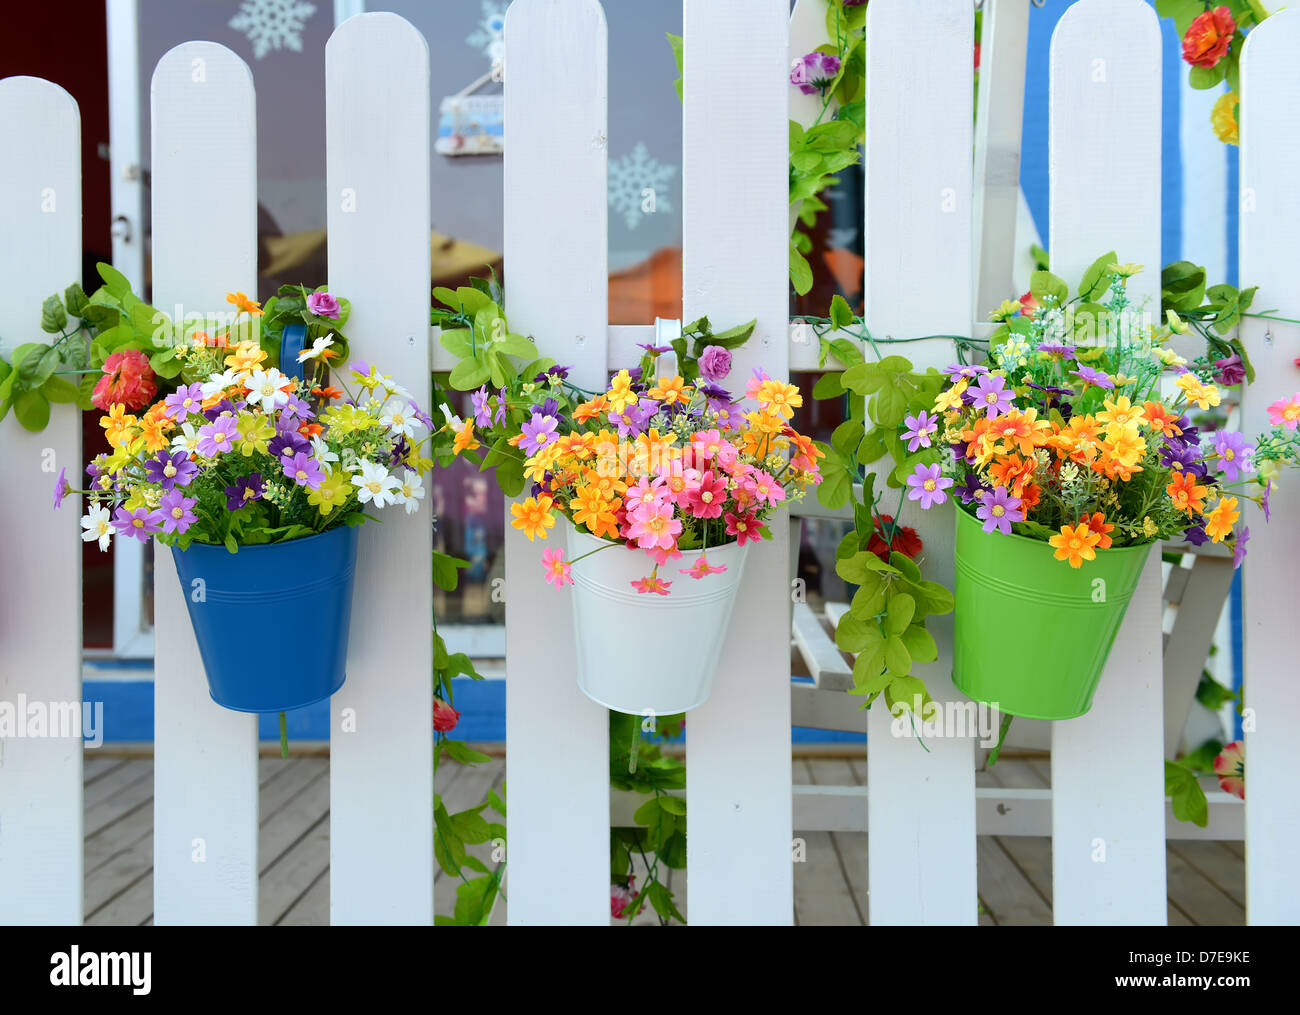 Hanging Flower Pots with fence Stock Photo - Alamy